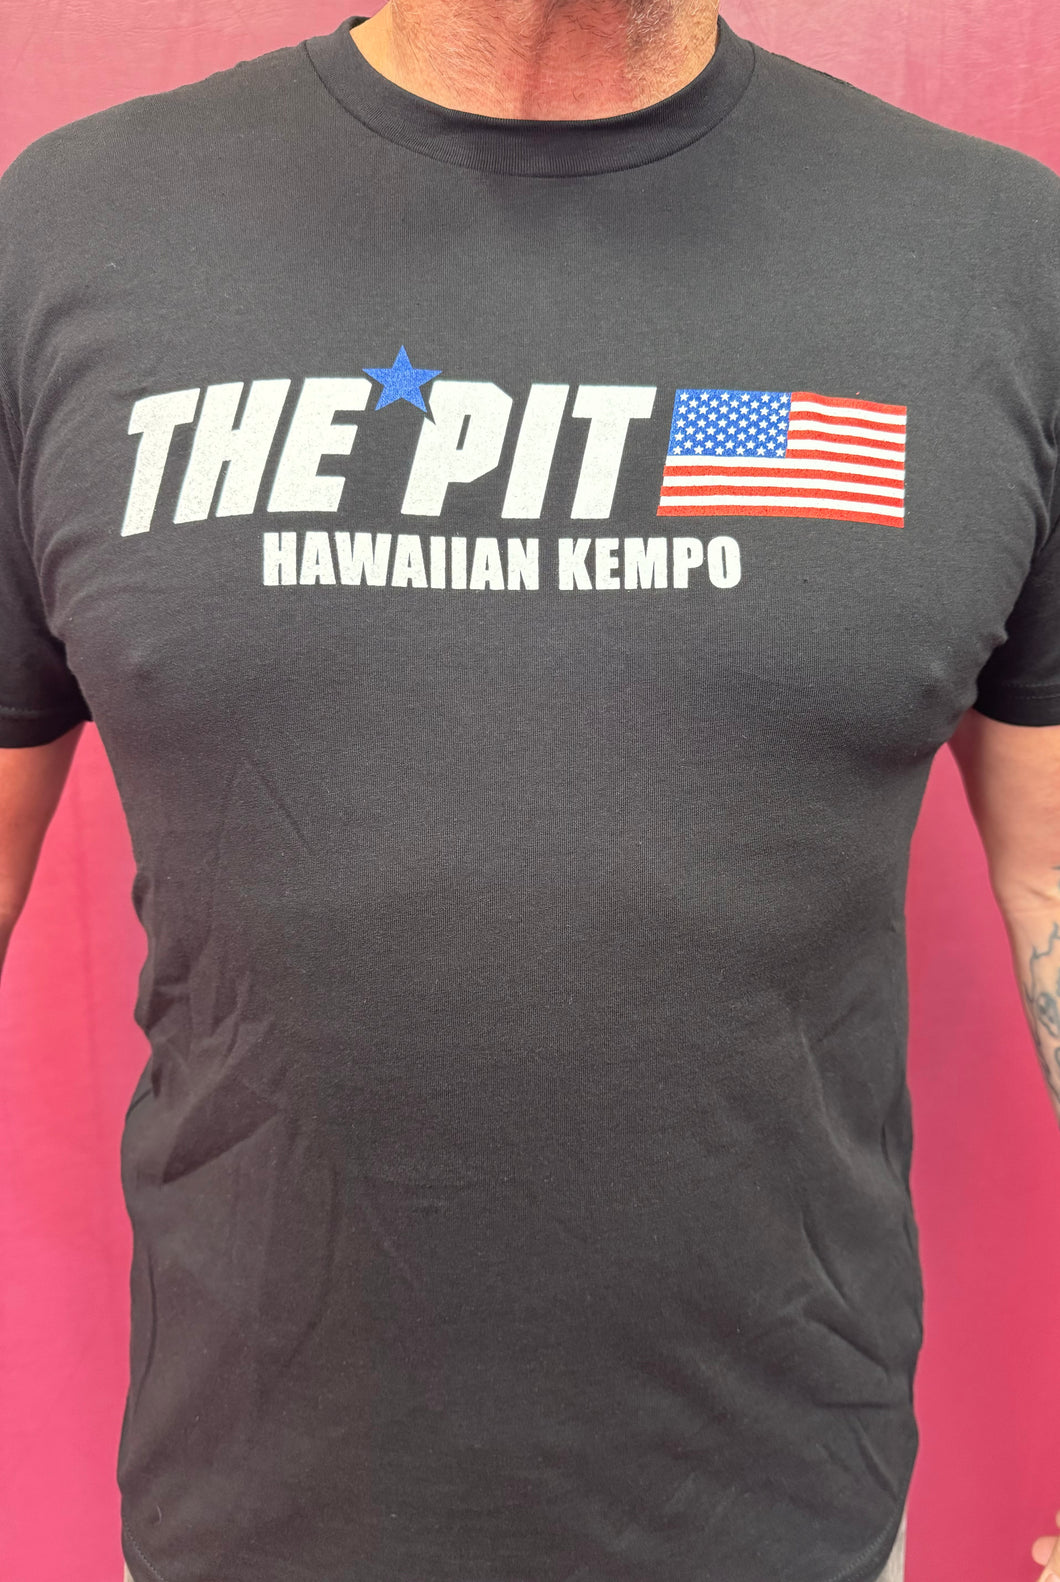 The Pit block letters American flag in front T-shirt